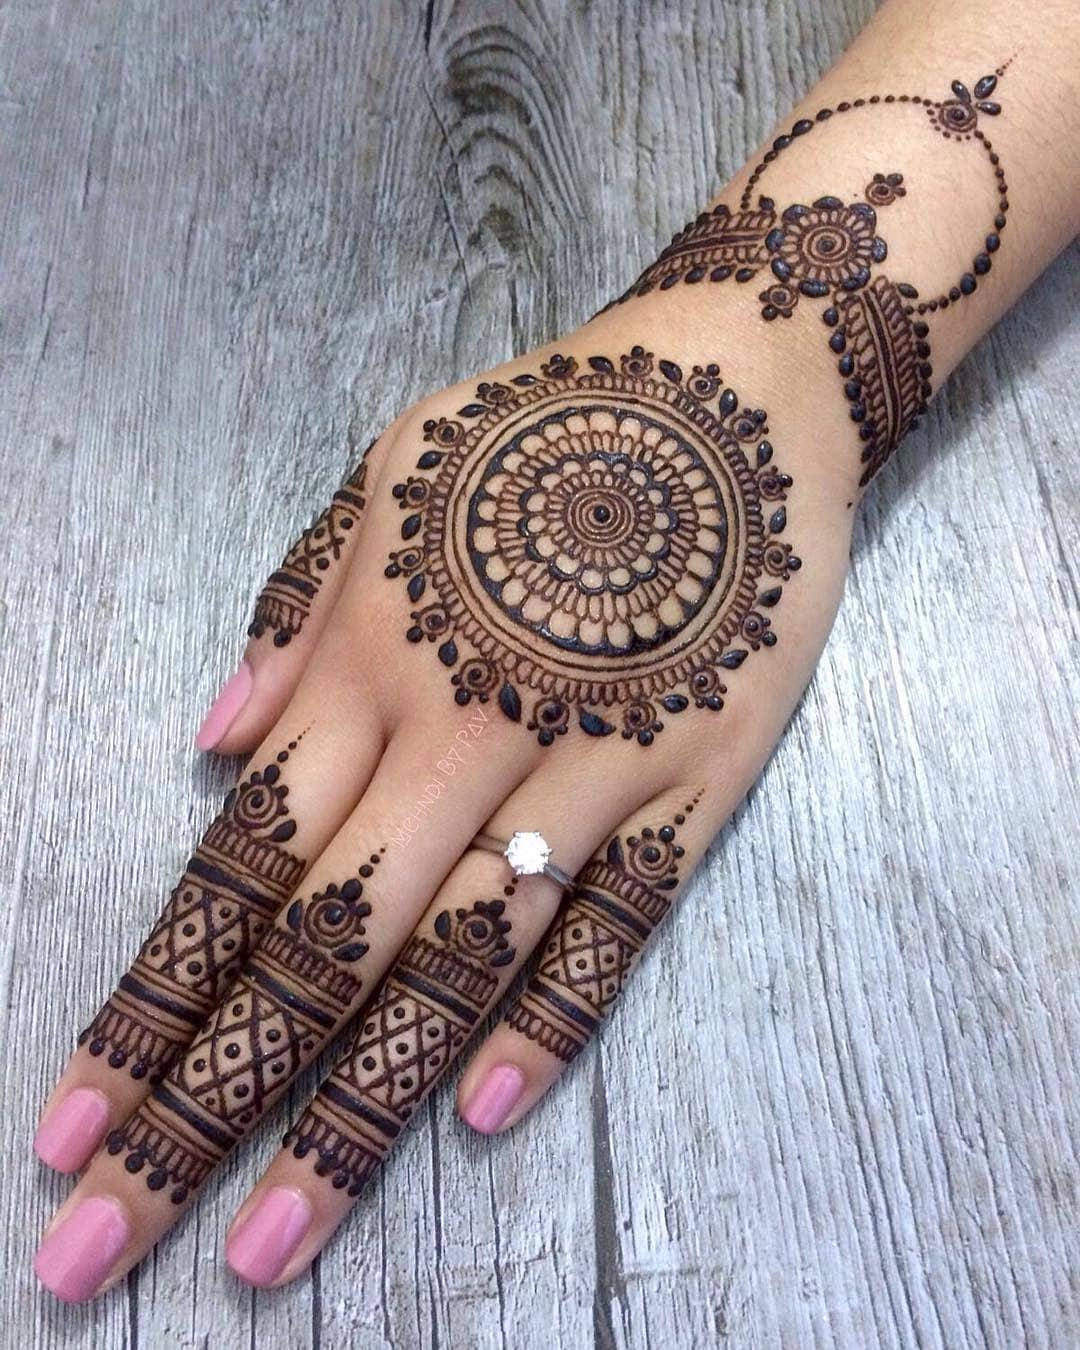 Back mehndi designs trending in 2021 - Get Inspiring Ideas for Planning  Your Perfect Wedding at fabweddings